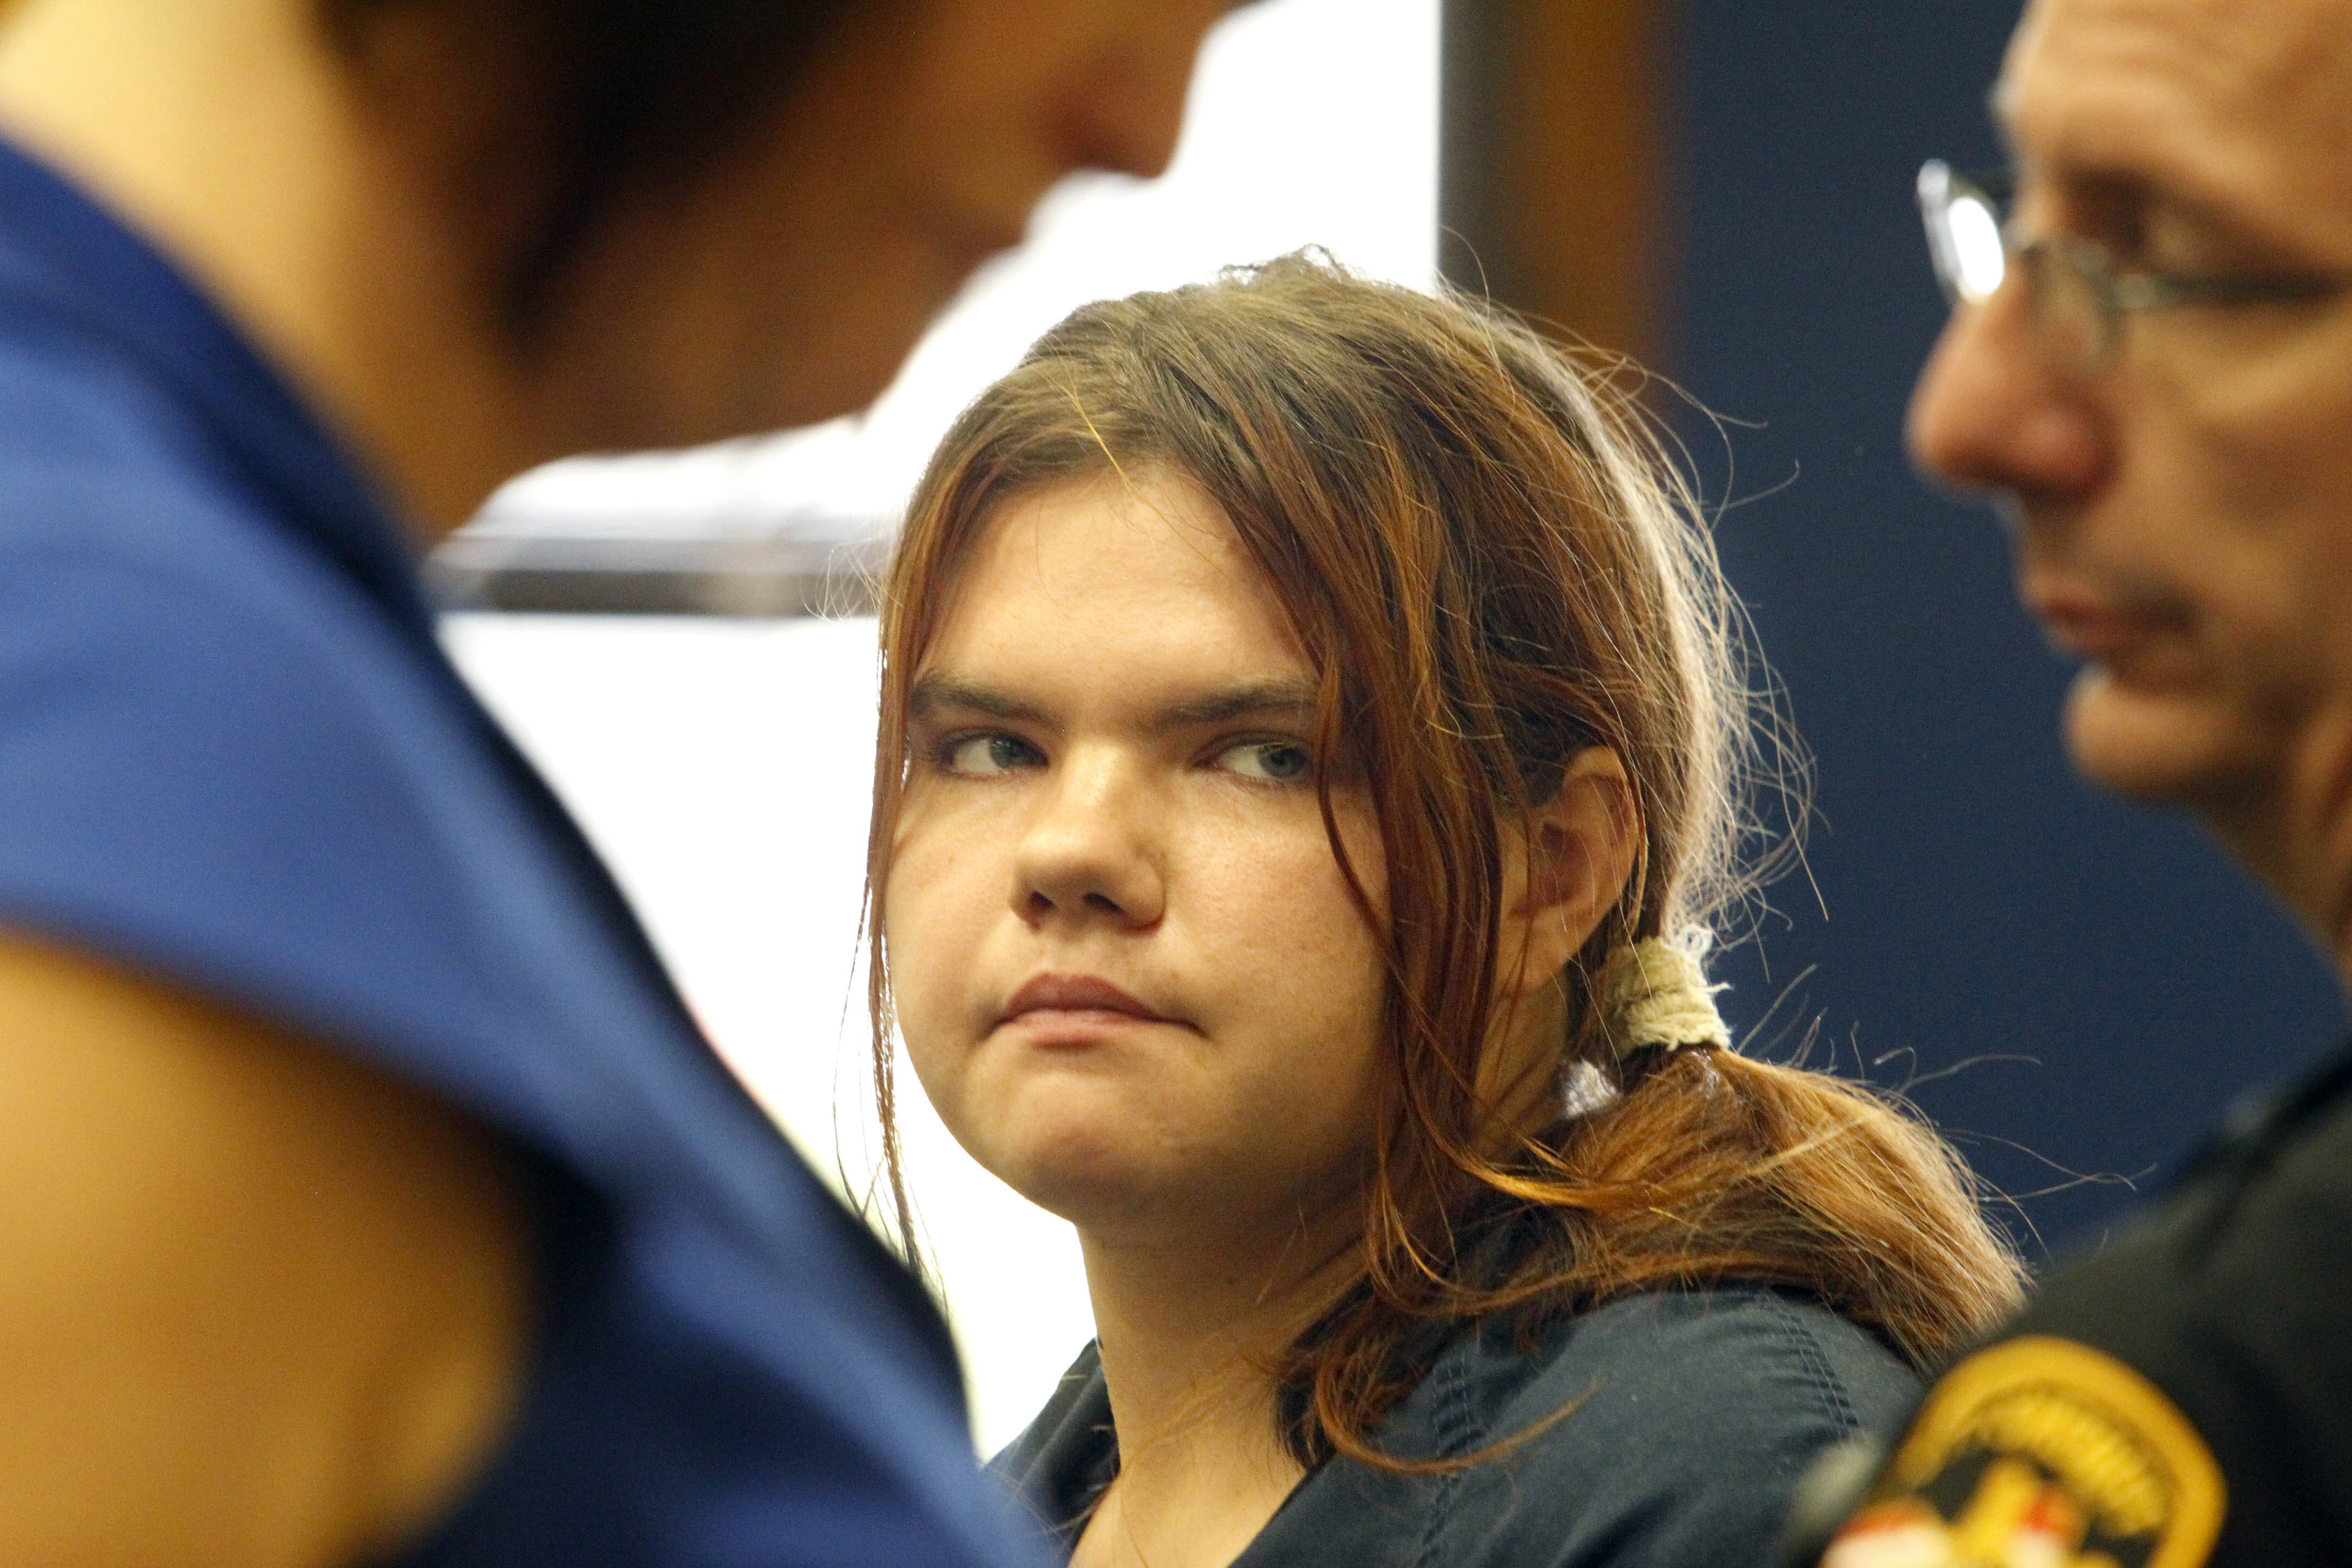 Oregon woman accused of murder to be evaluated The Blade